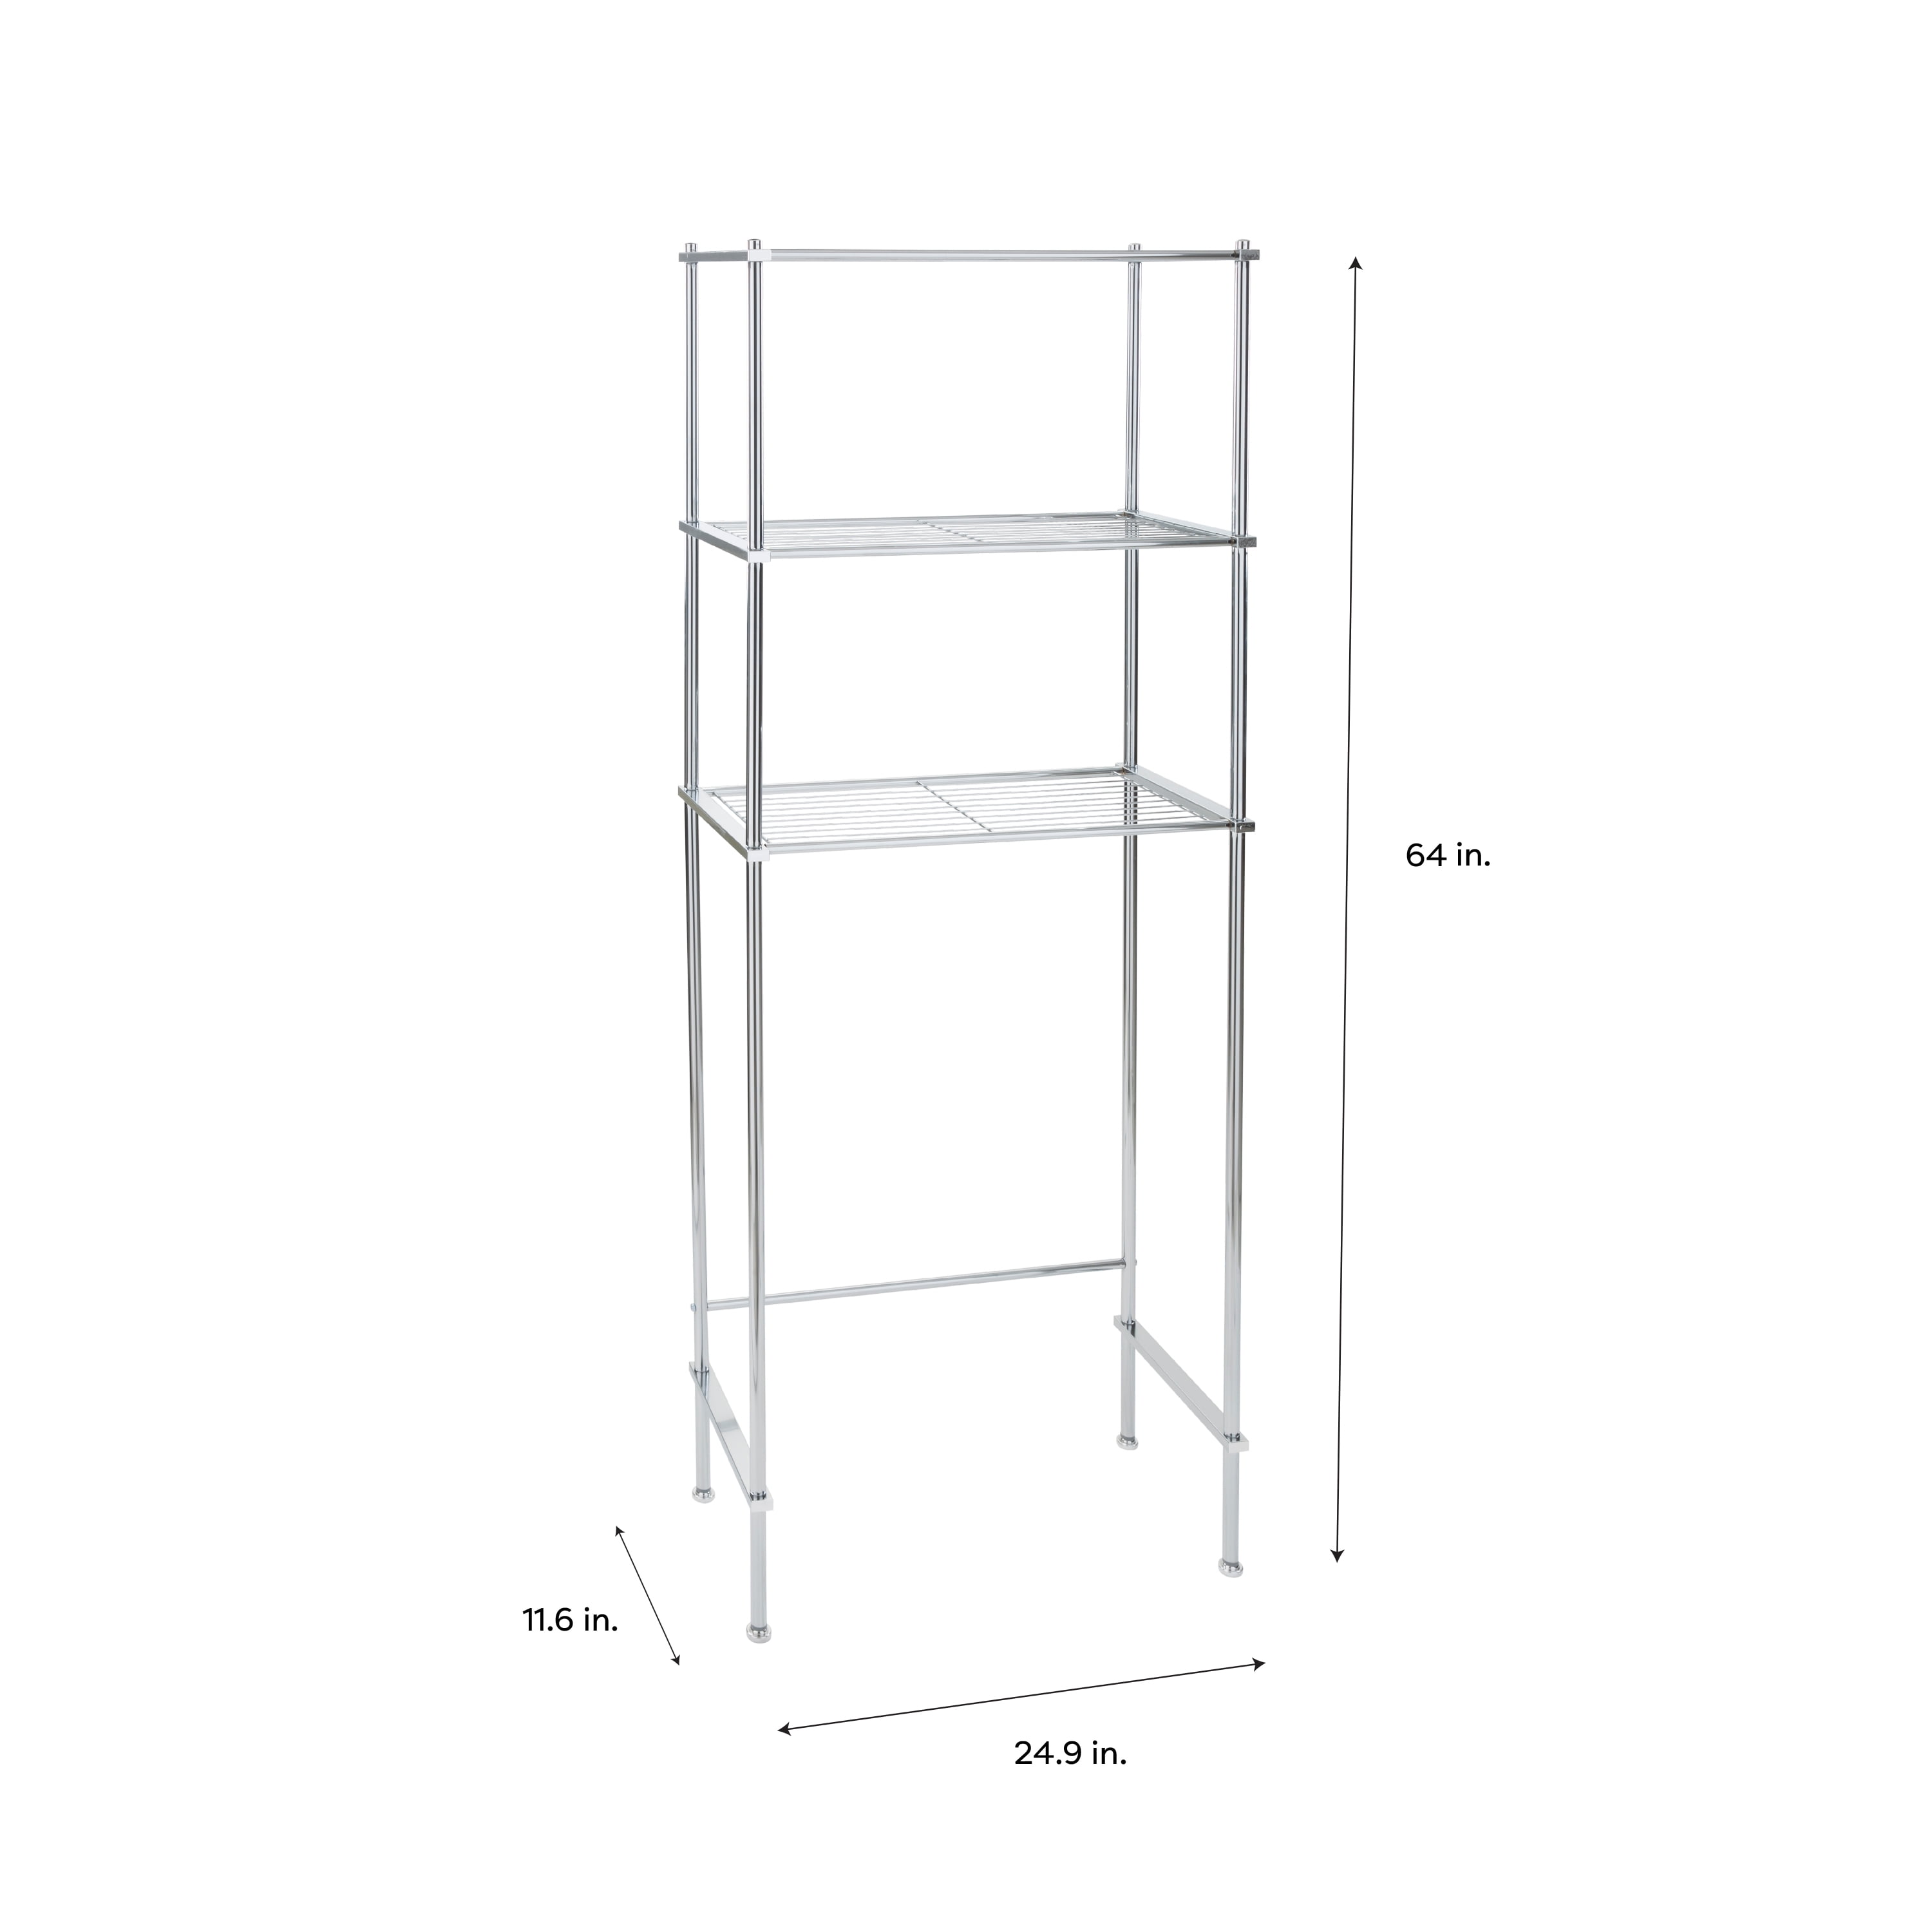 Organize It All Chrome 1-Tier Glass Wall Mount Bathroom Shelf (22.25-in x  4.5-in x 4.75-in) in the Bathroom Shelves department at